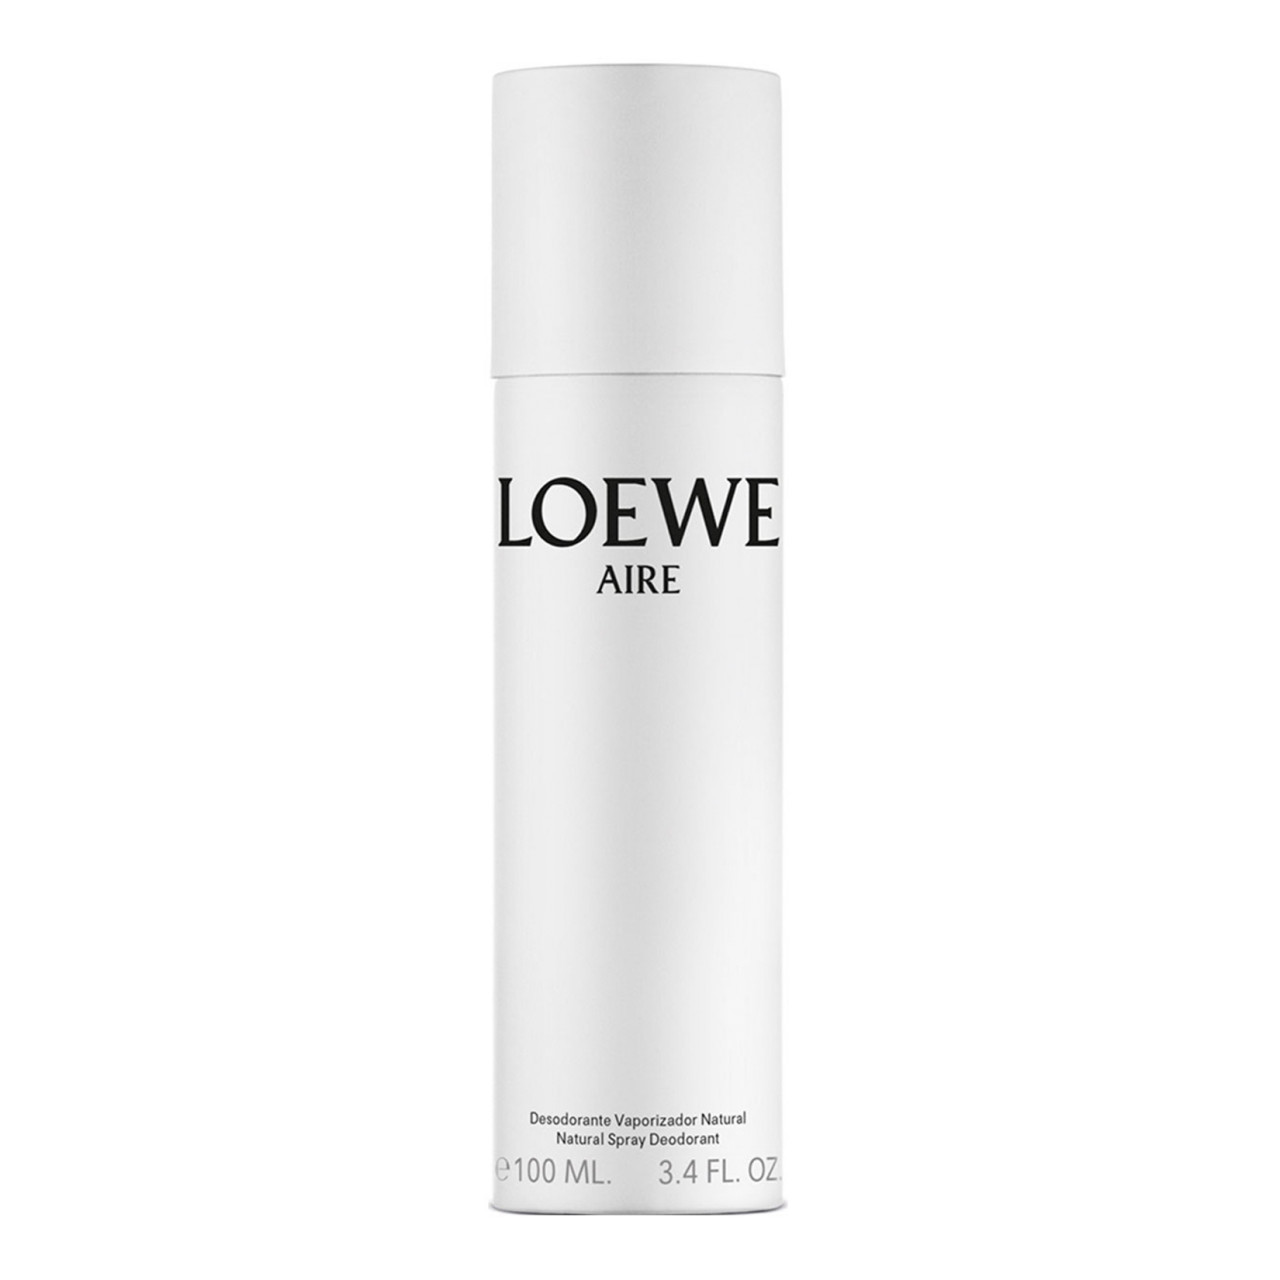 Loewe - Aire Deo Natural Spray - 